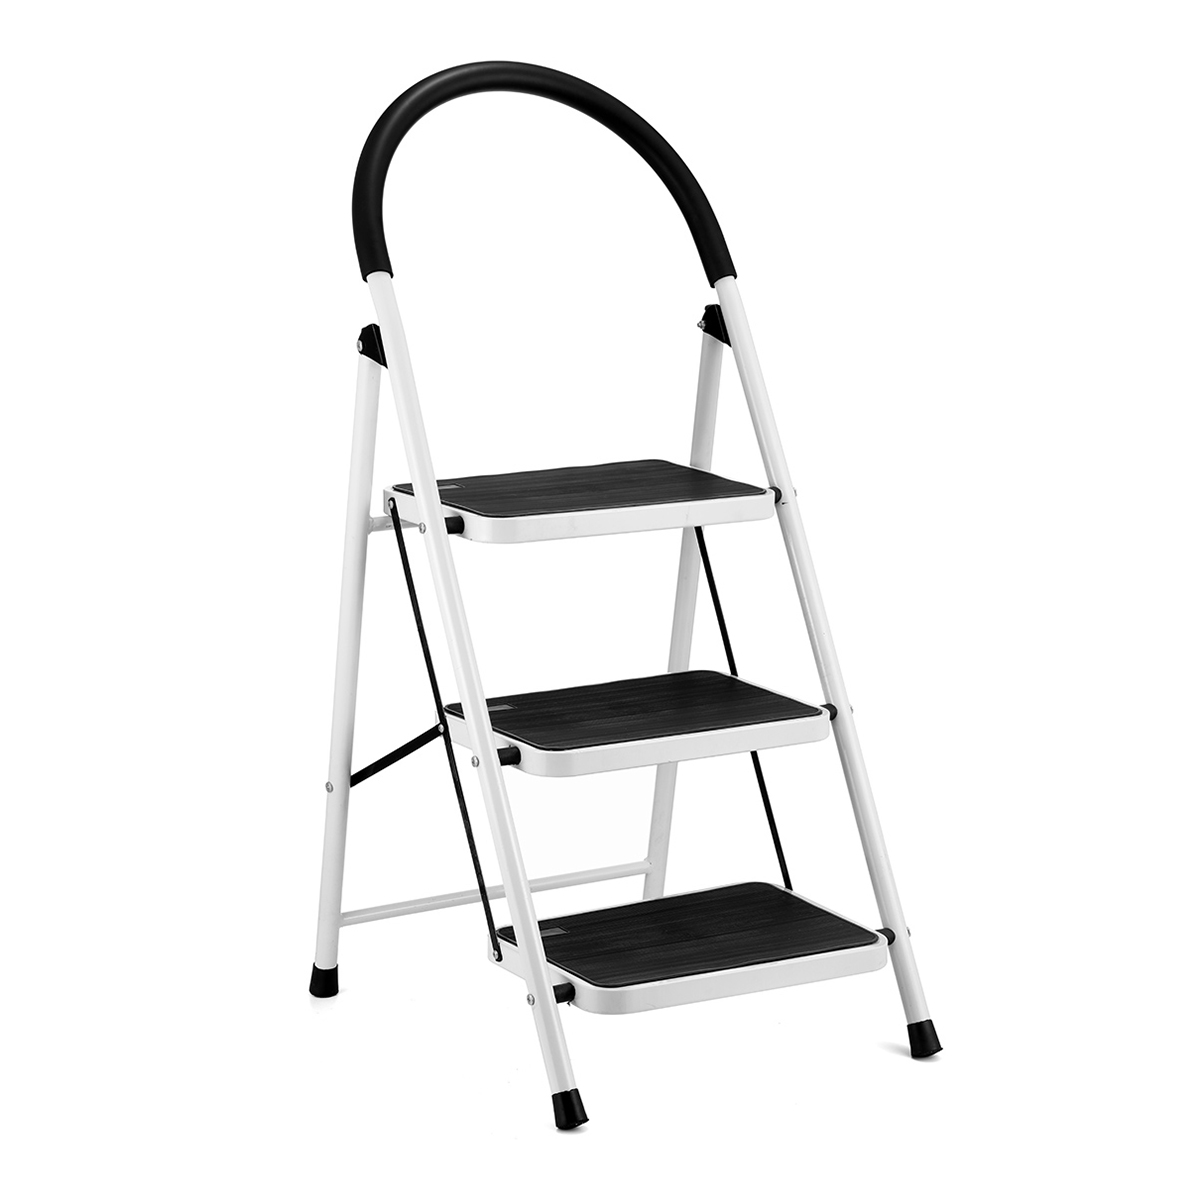 Image of 3 Step Ladder Folding Step Stool with Rubber Wide Anti-Slip Pedal Sturdy Steel Ladder Steel Ladder Hold Up to 350lbs for